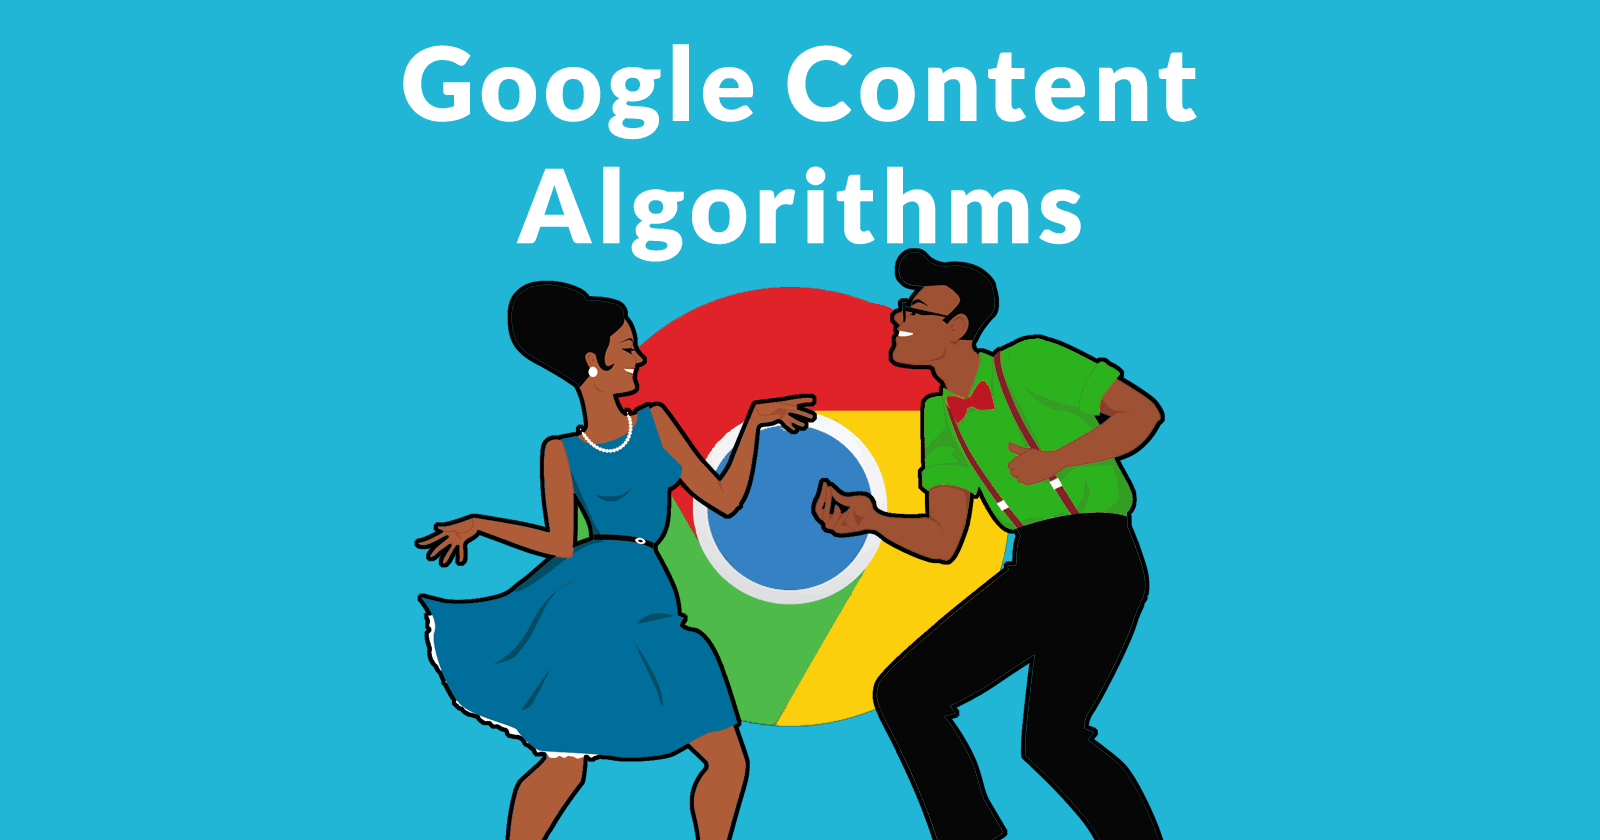 The words "Google Content Algorithms" are above the image of a man and woman dancing, with Google's logo behind them. It's evocative of the Google Dance, which is a name for Google's Algorithm Updates.